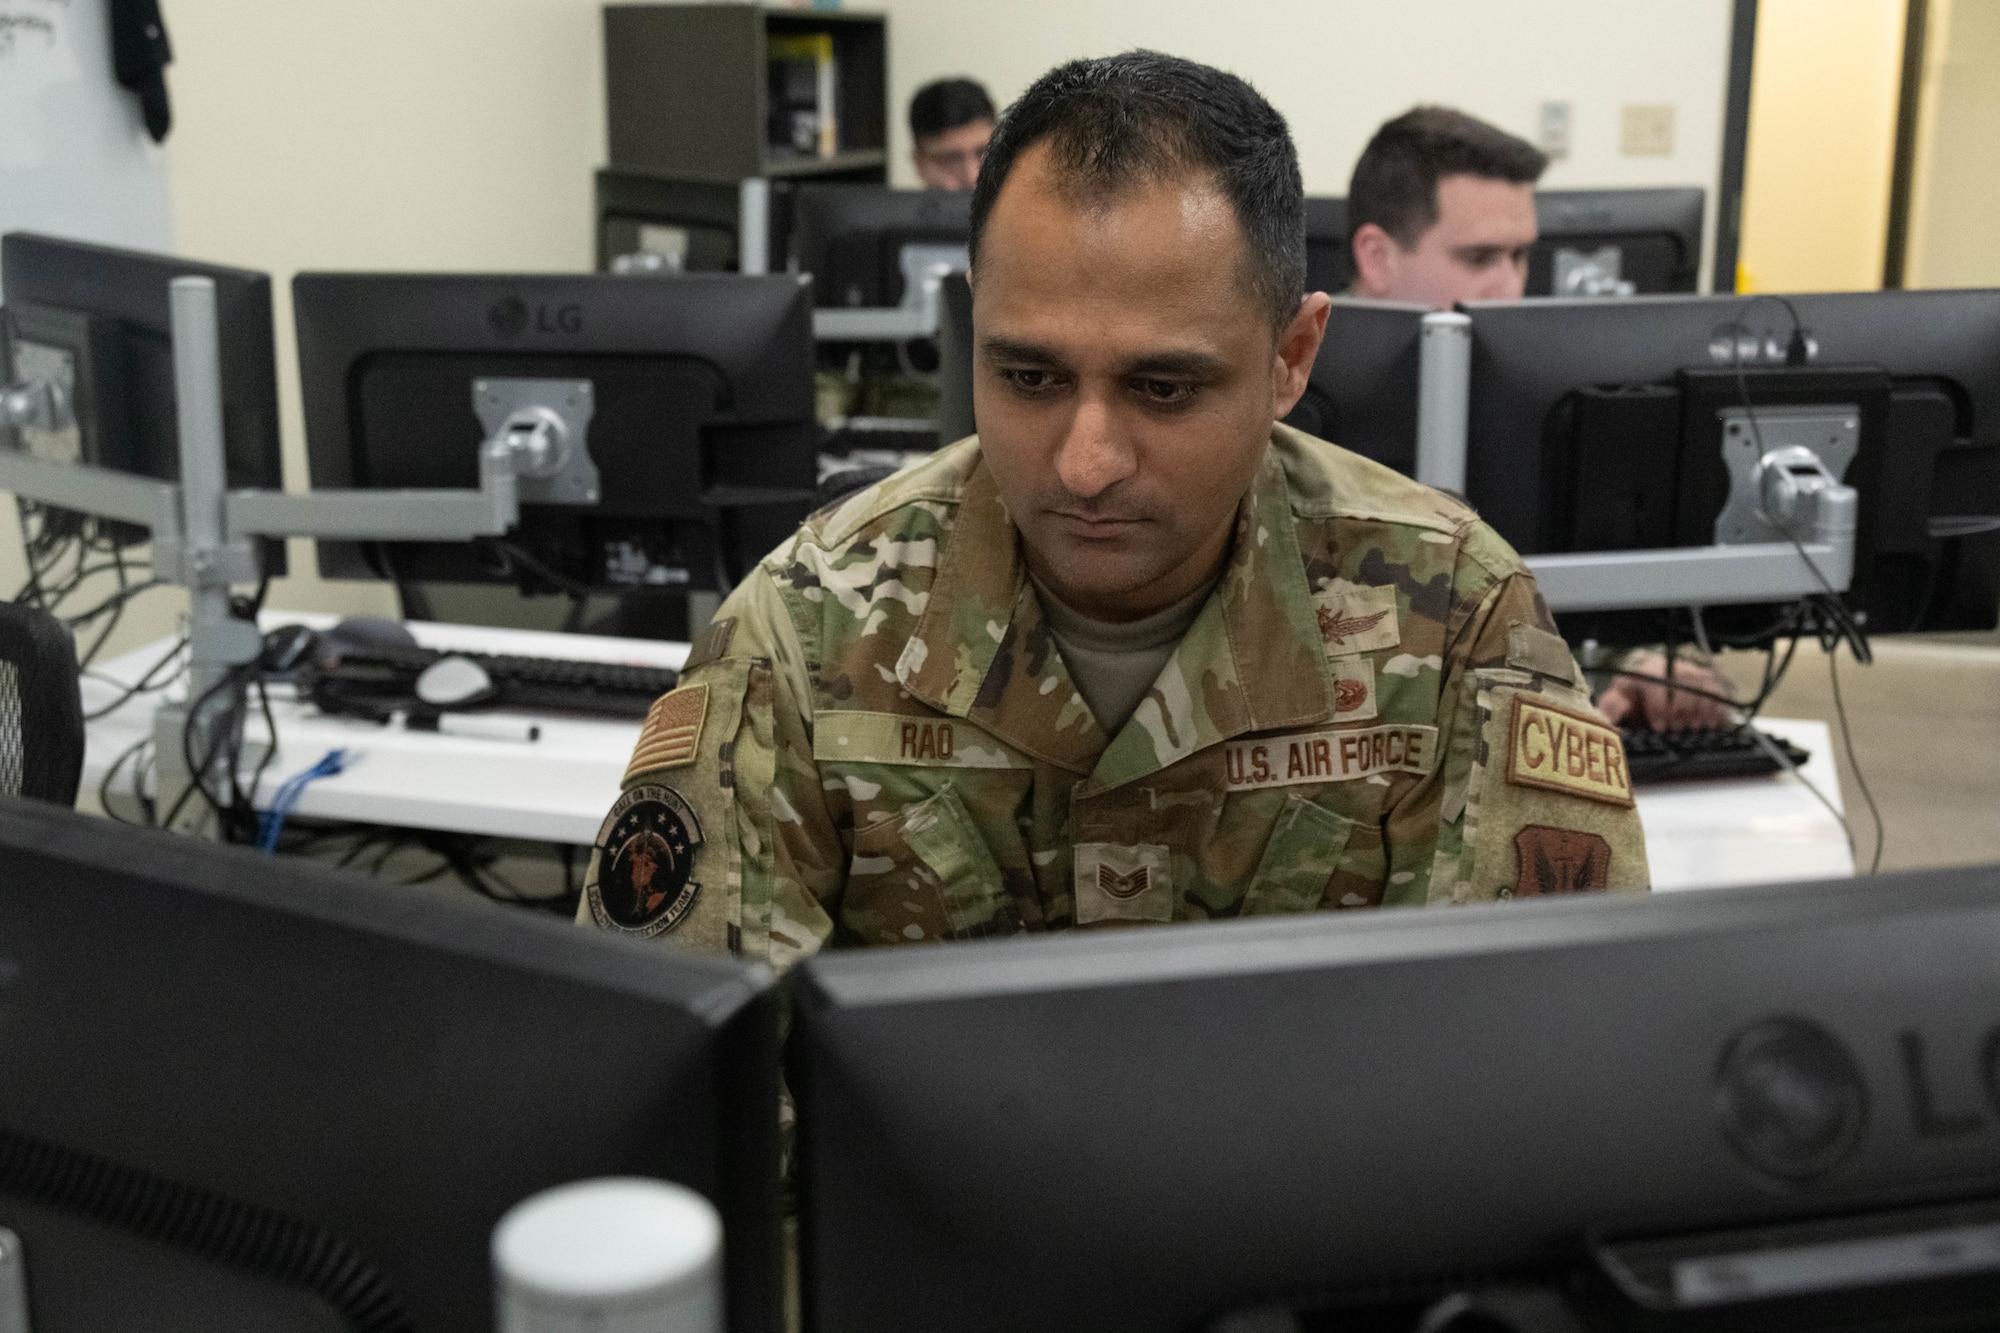 An Airmen assigned to the 275th Cyberspace Operations Squadron works at a computer terminal at Warfield Air National Guard Base at Martin State Airport, Middle River, Md., on January 10, 2023.